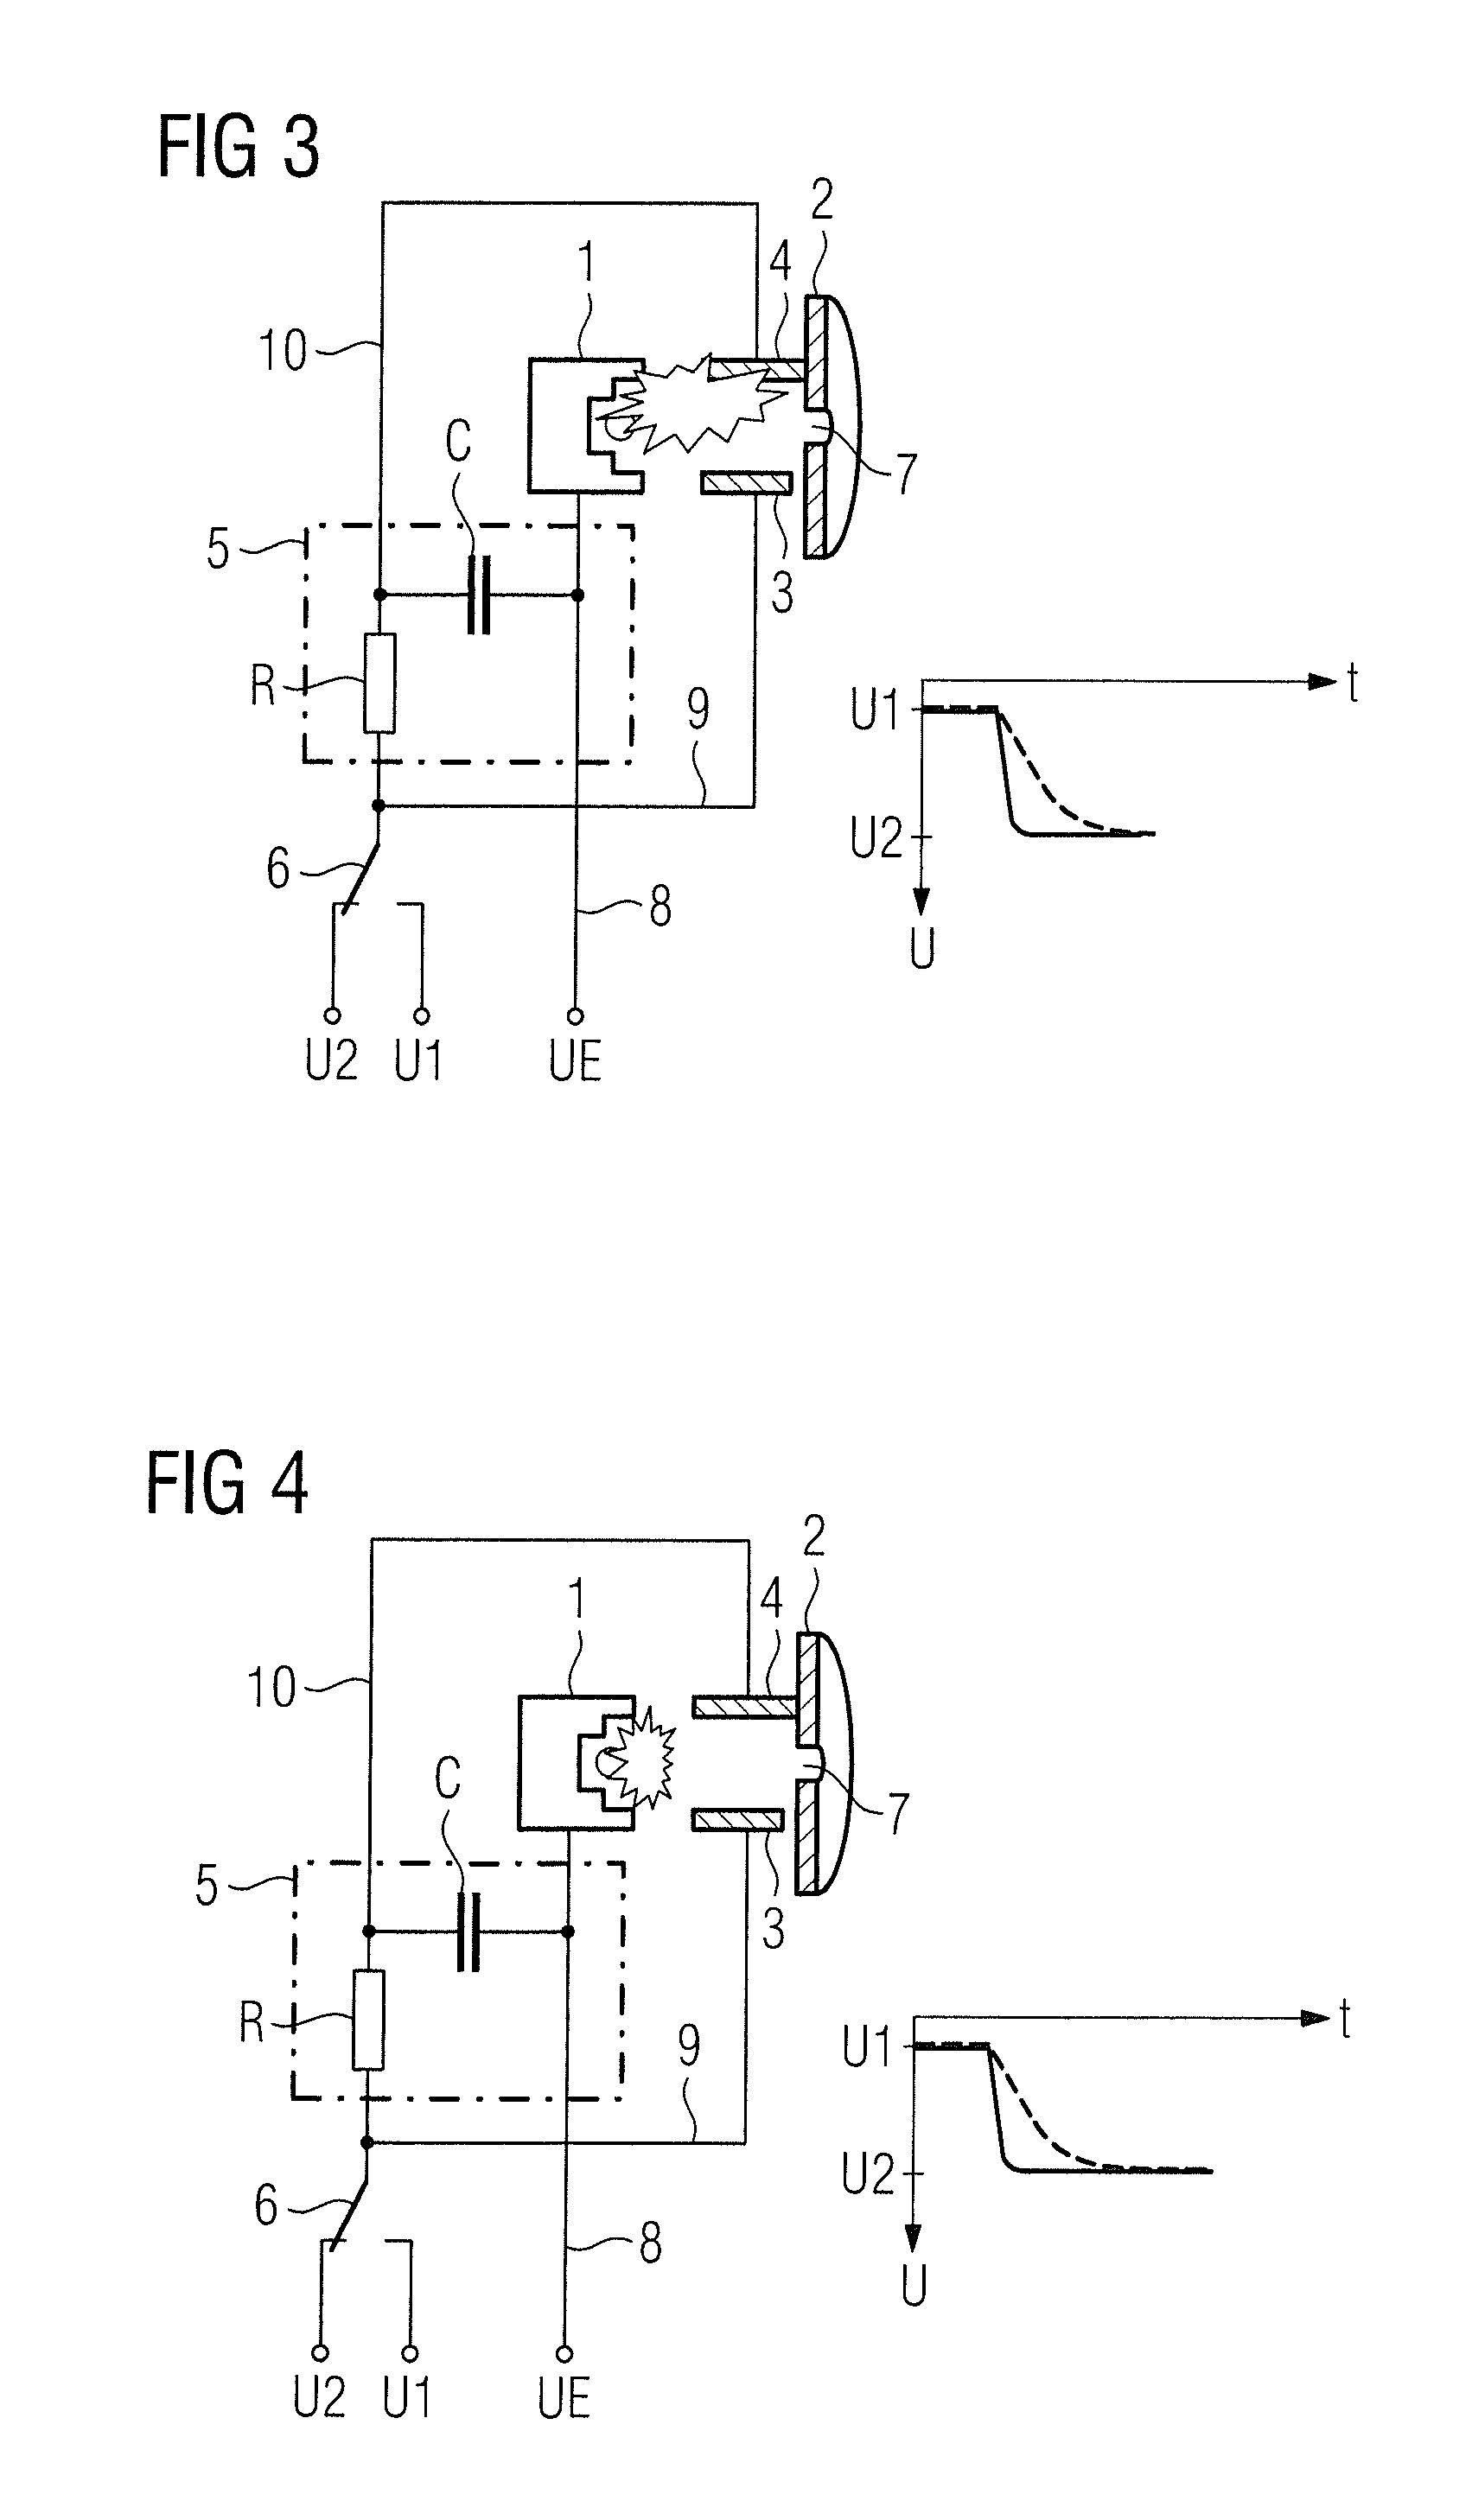 Device and method to control an electron beam for the generation of x-ray radiation, in an x-ray tube